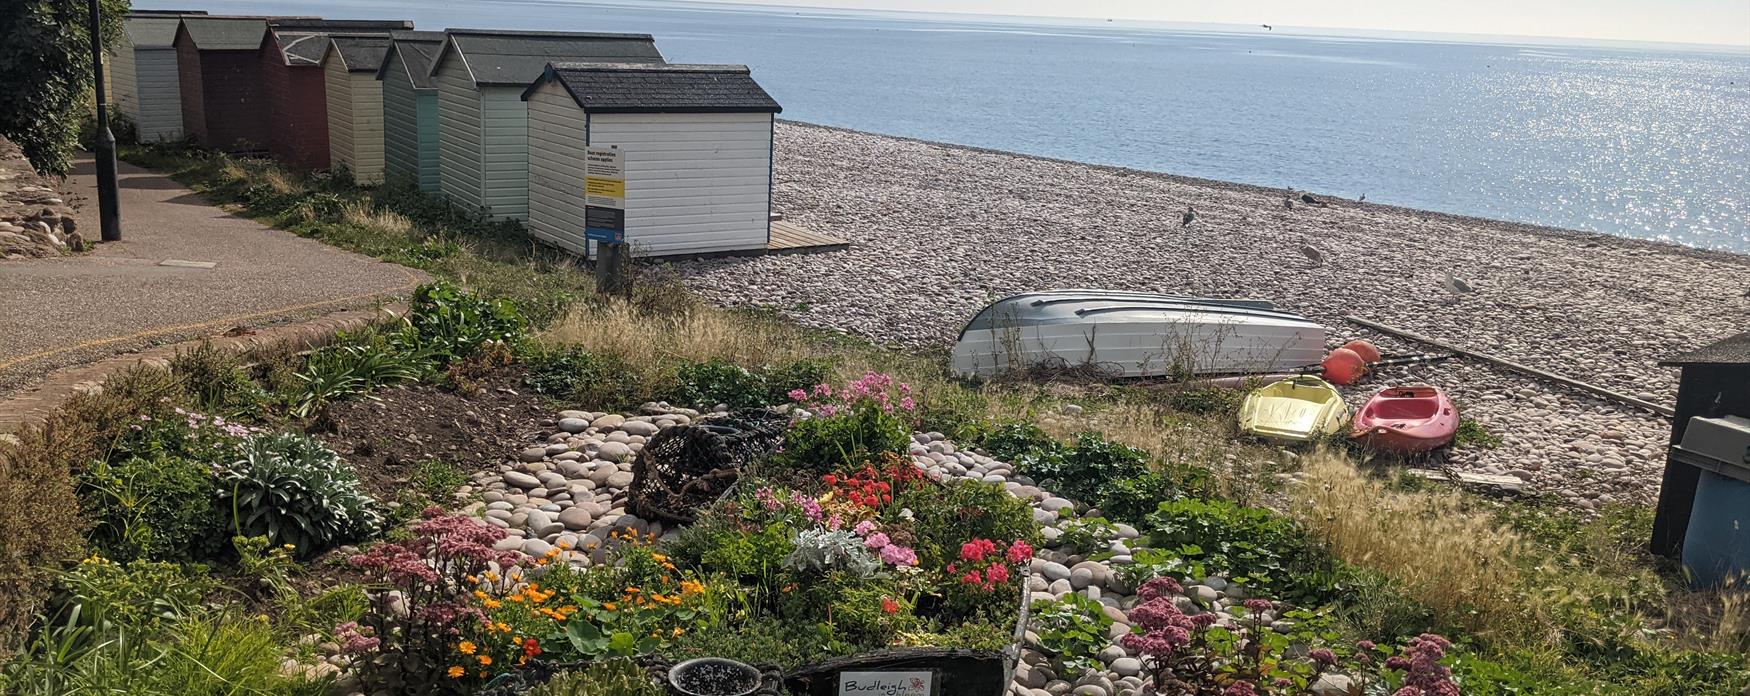 A small rowing boat is sat on a pebble beach filled with brightly coloured flowers of red, pink, yellow, green and orange, surrounded by a small pebble and flower display. The display is sat on a pebble beach in thew sunshine with lightly pastel coloured beach huts behind.